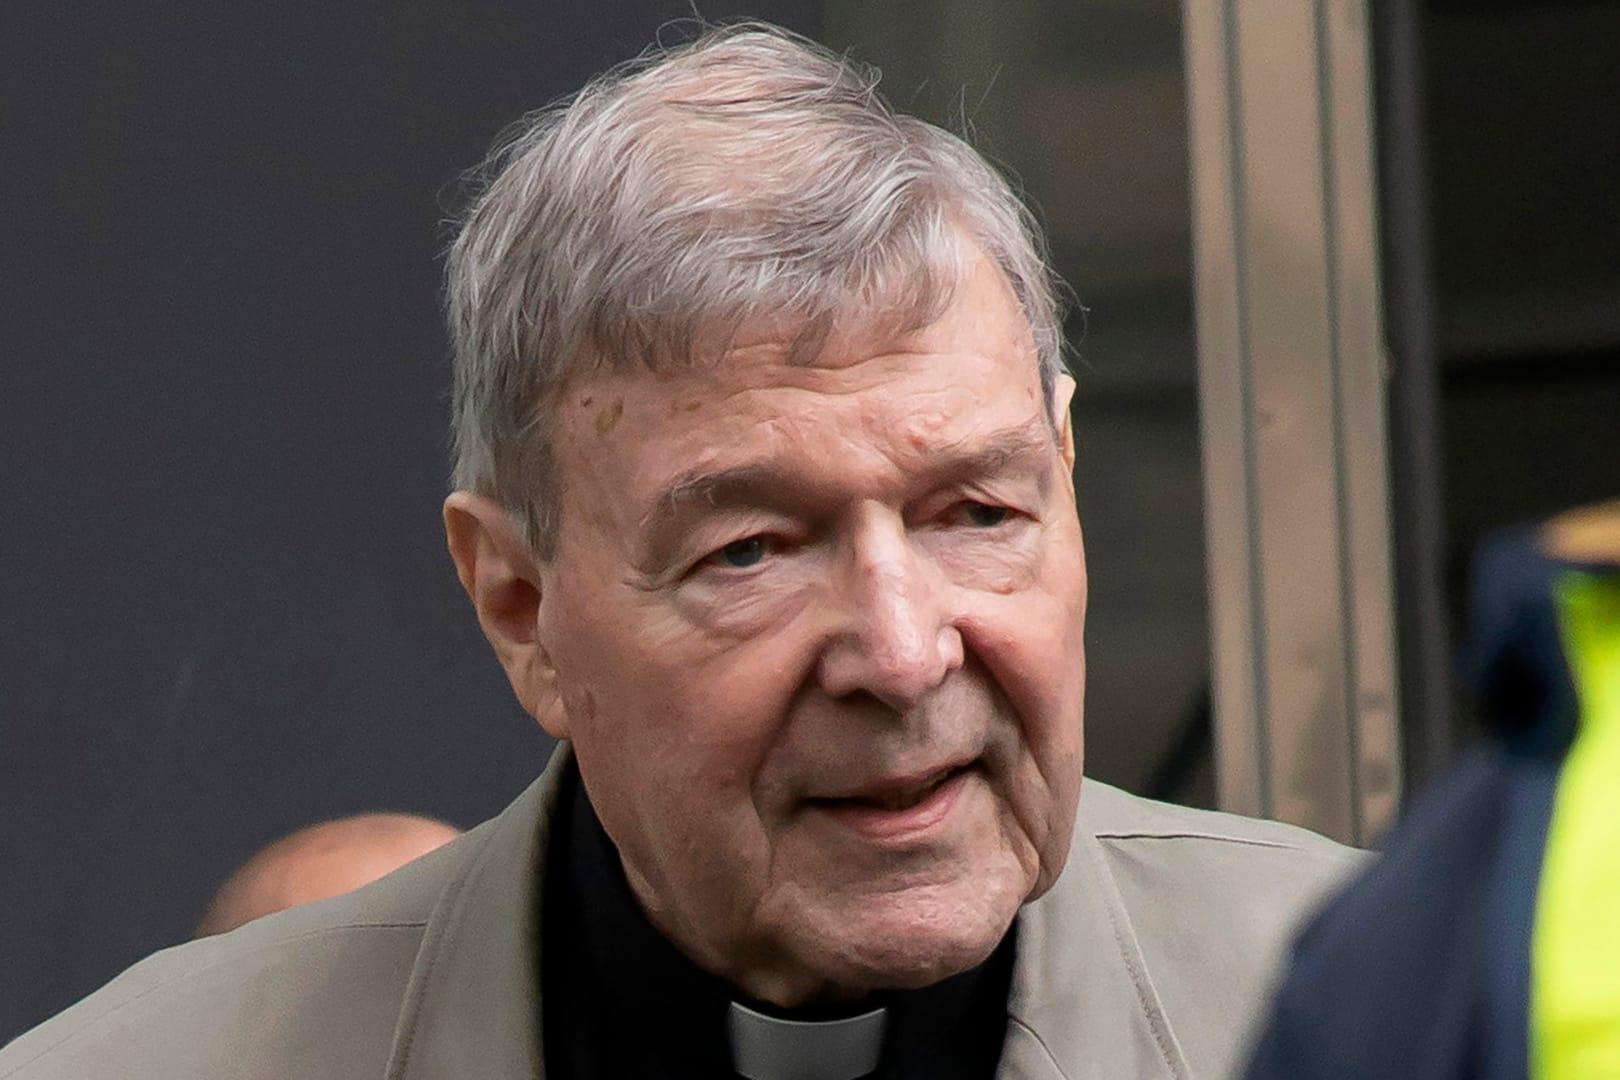 Cardinal Pell appeal verdict looms but may not be final word